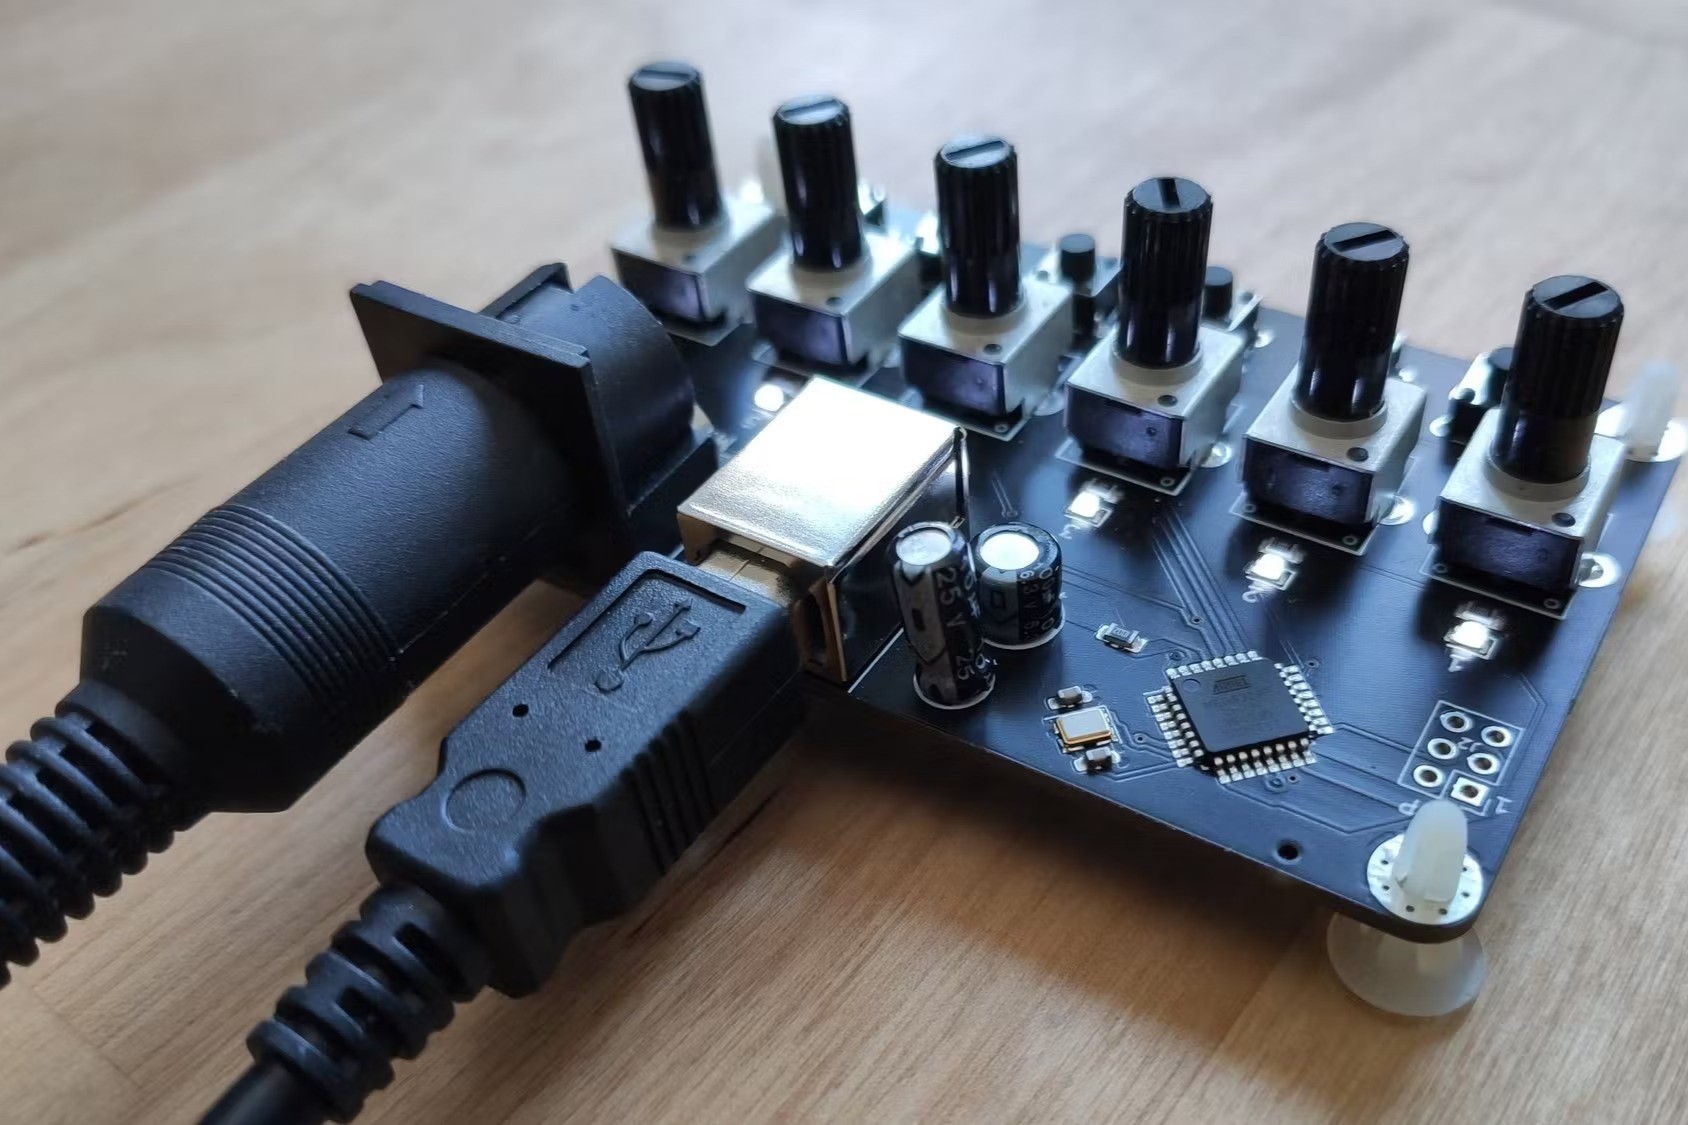 Identifying The Ground Connection Pin On A MIDI Connector